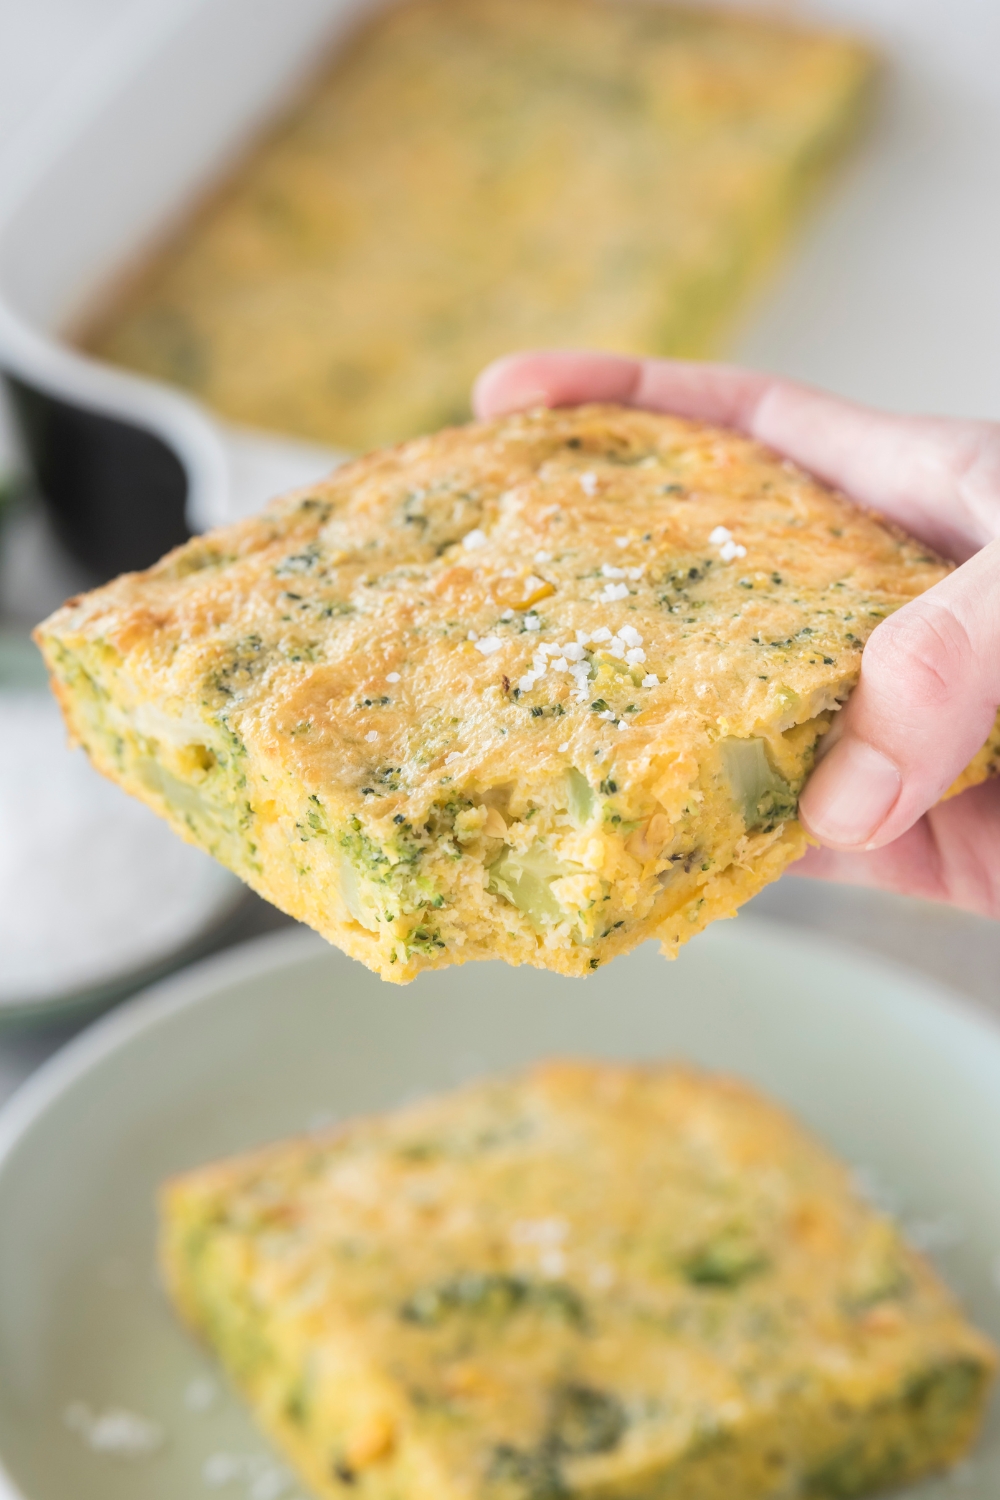 A square of broccoli cornbread garnished with sea salt and a bite has been taken out.